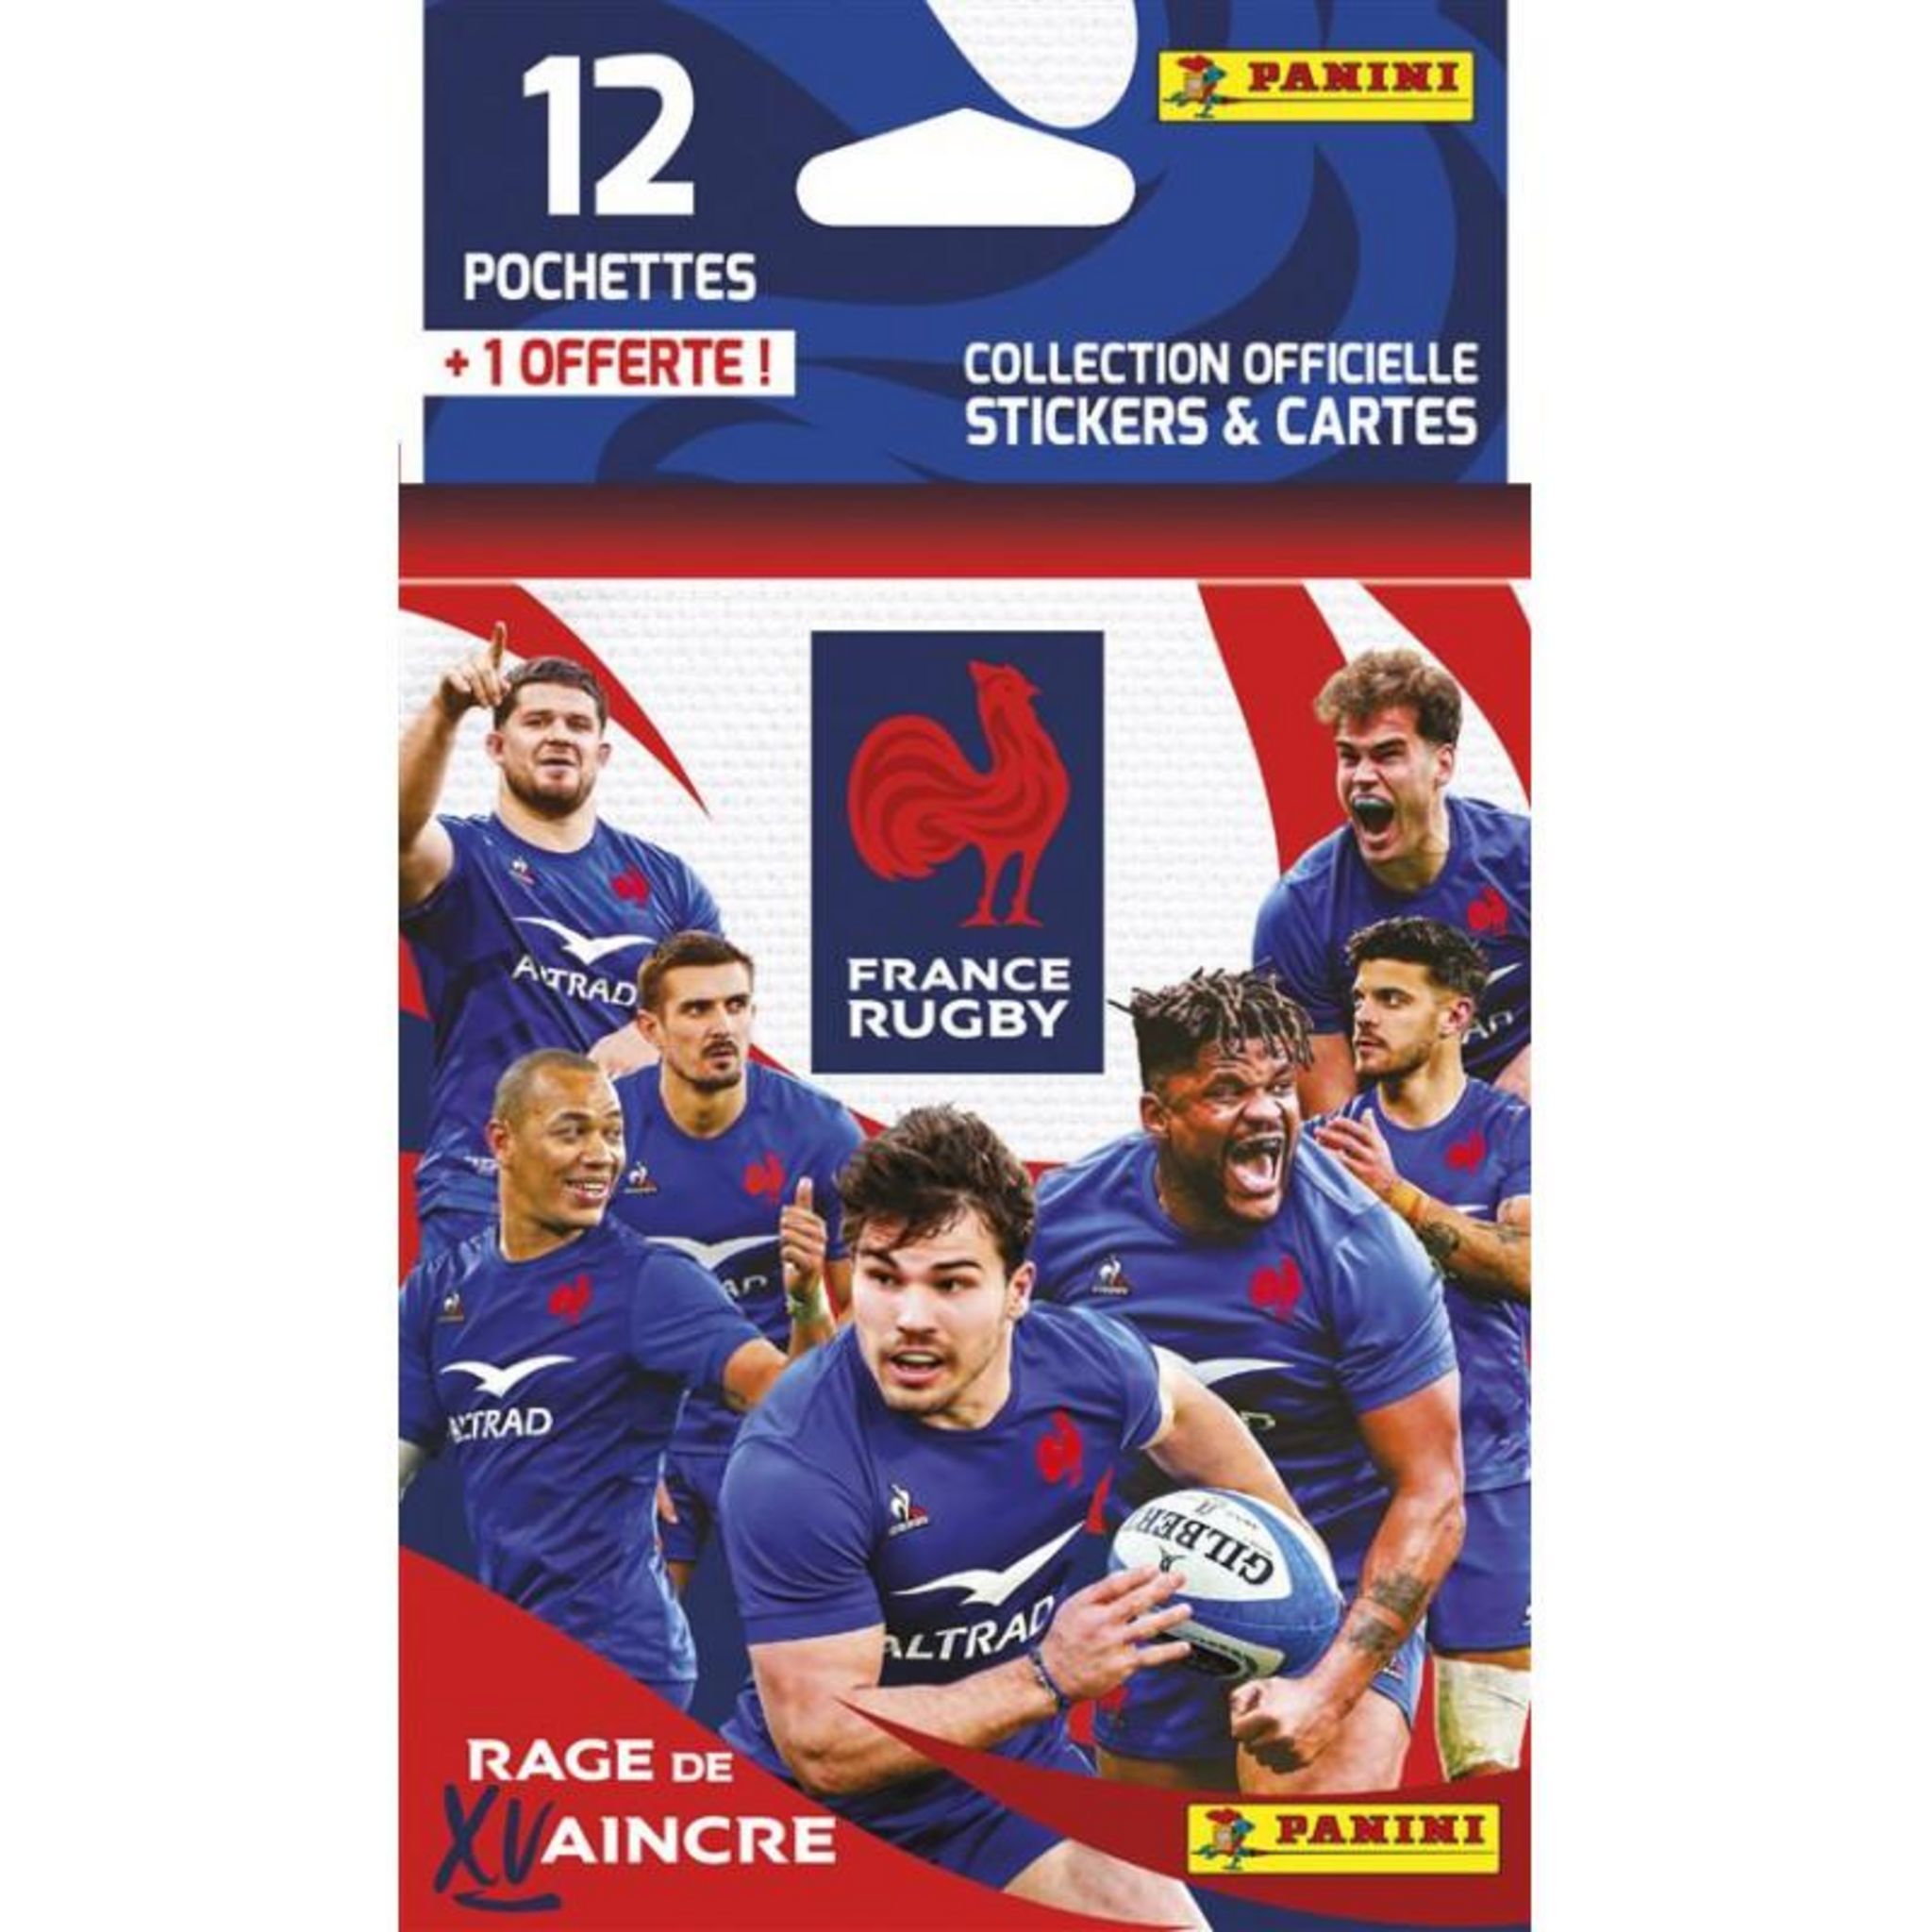 Panini Carte à collectionner Panini Rugby RUGBY EDF Album avec 2